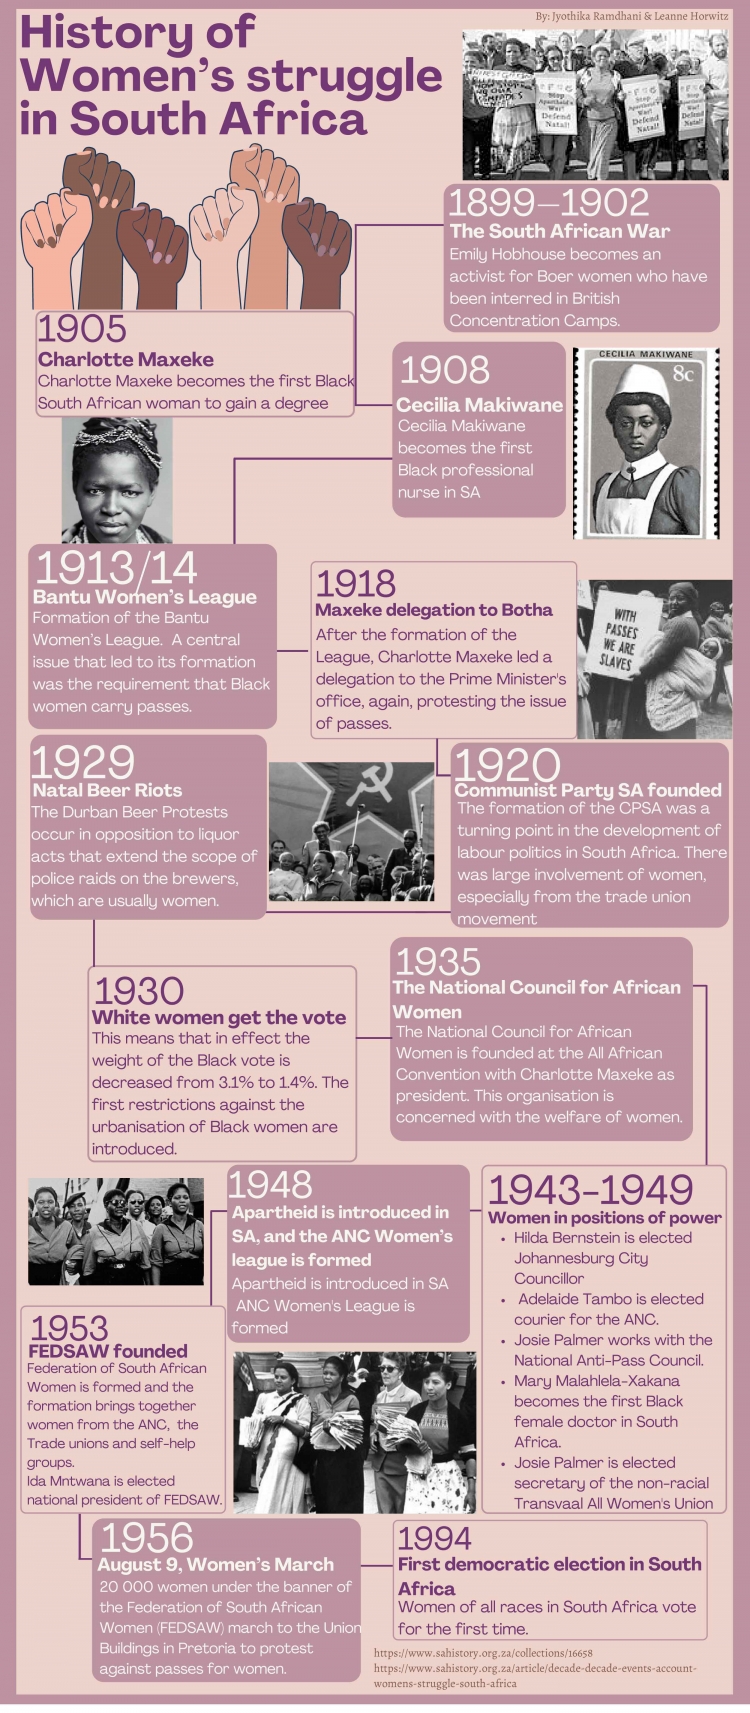 History_of_Women’s_struggle_in_South_Africa.Final_(1)